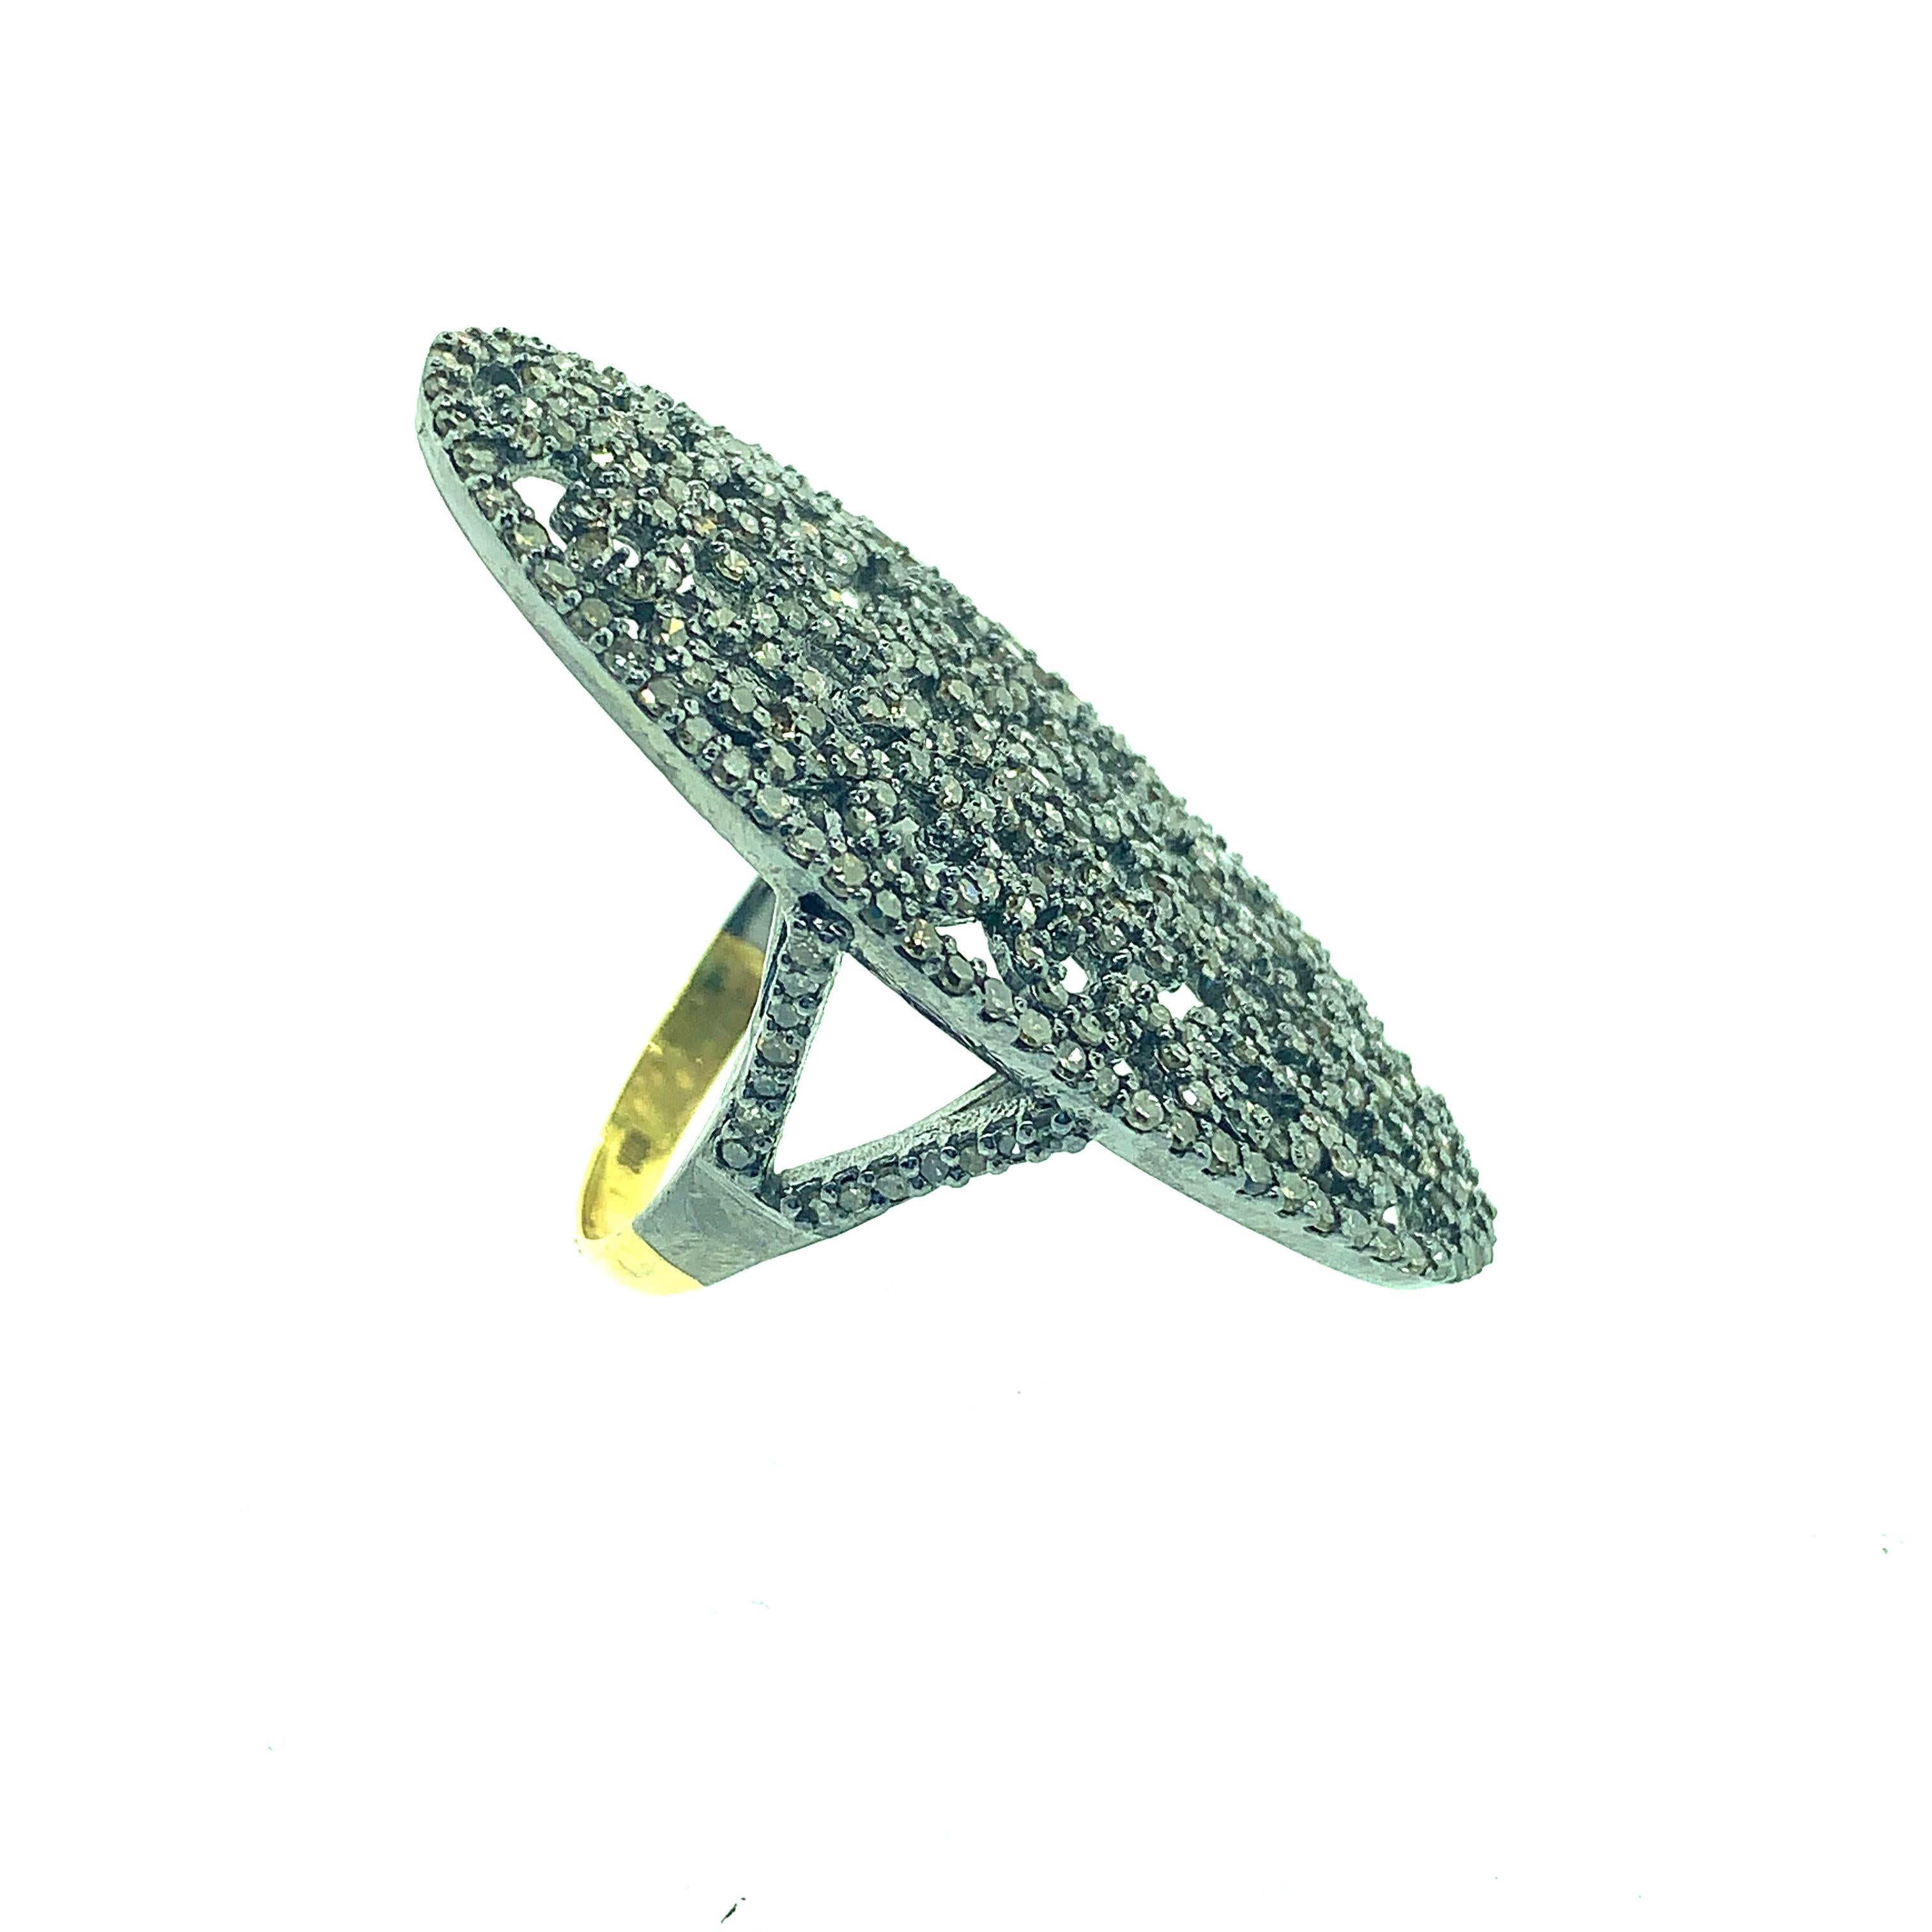 7.75 Size 2.40 ct Champagne Diamond Ring set in Oxidized Sterling Silver with half shank in pure 18K Gold. This ring is 1.75 Inch Long and looks perfect   as a cocktail ring. The diamonds are champagne color but they have nice sparkle to